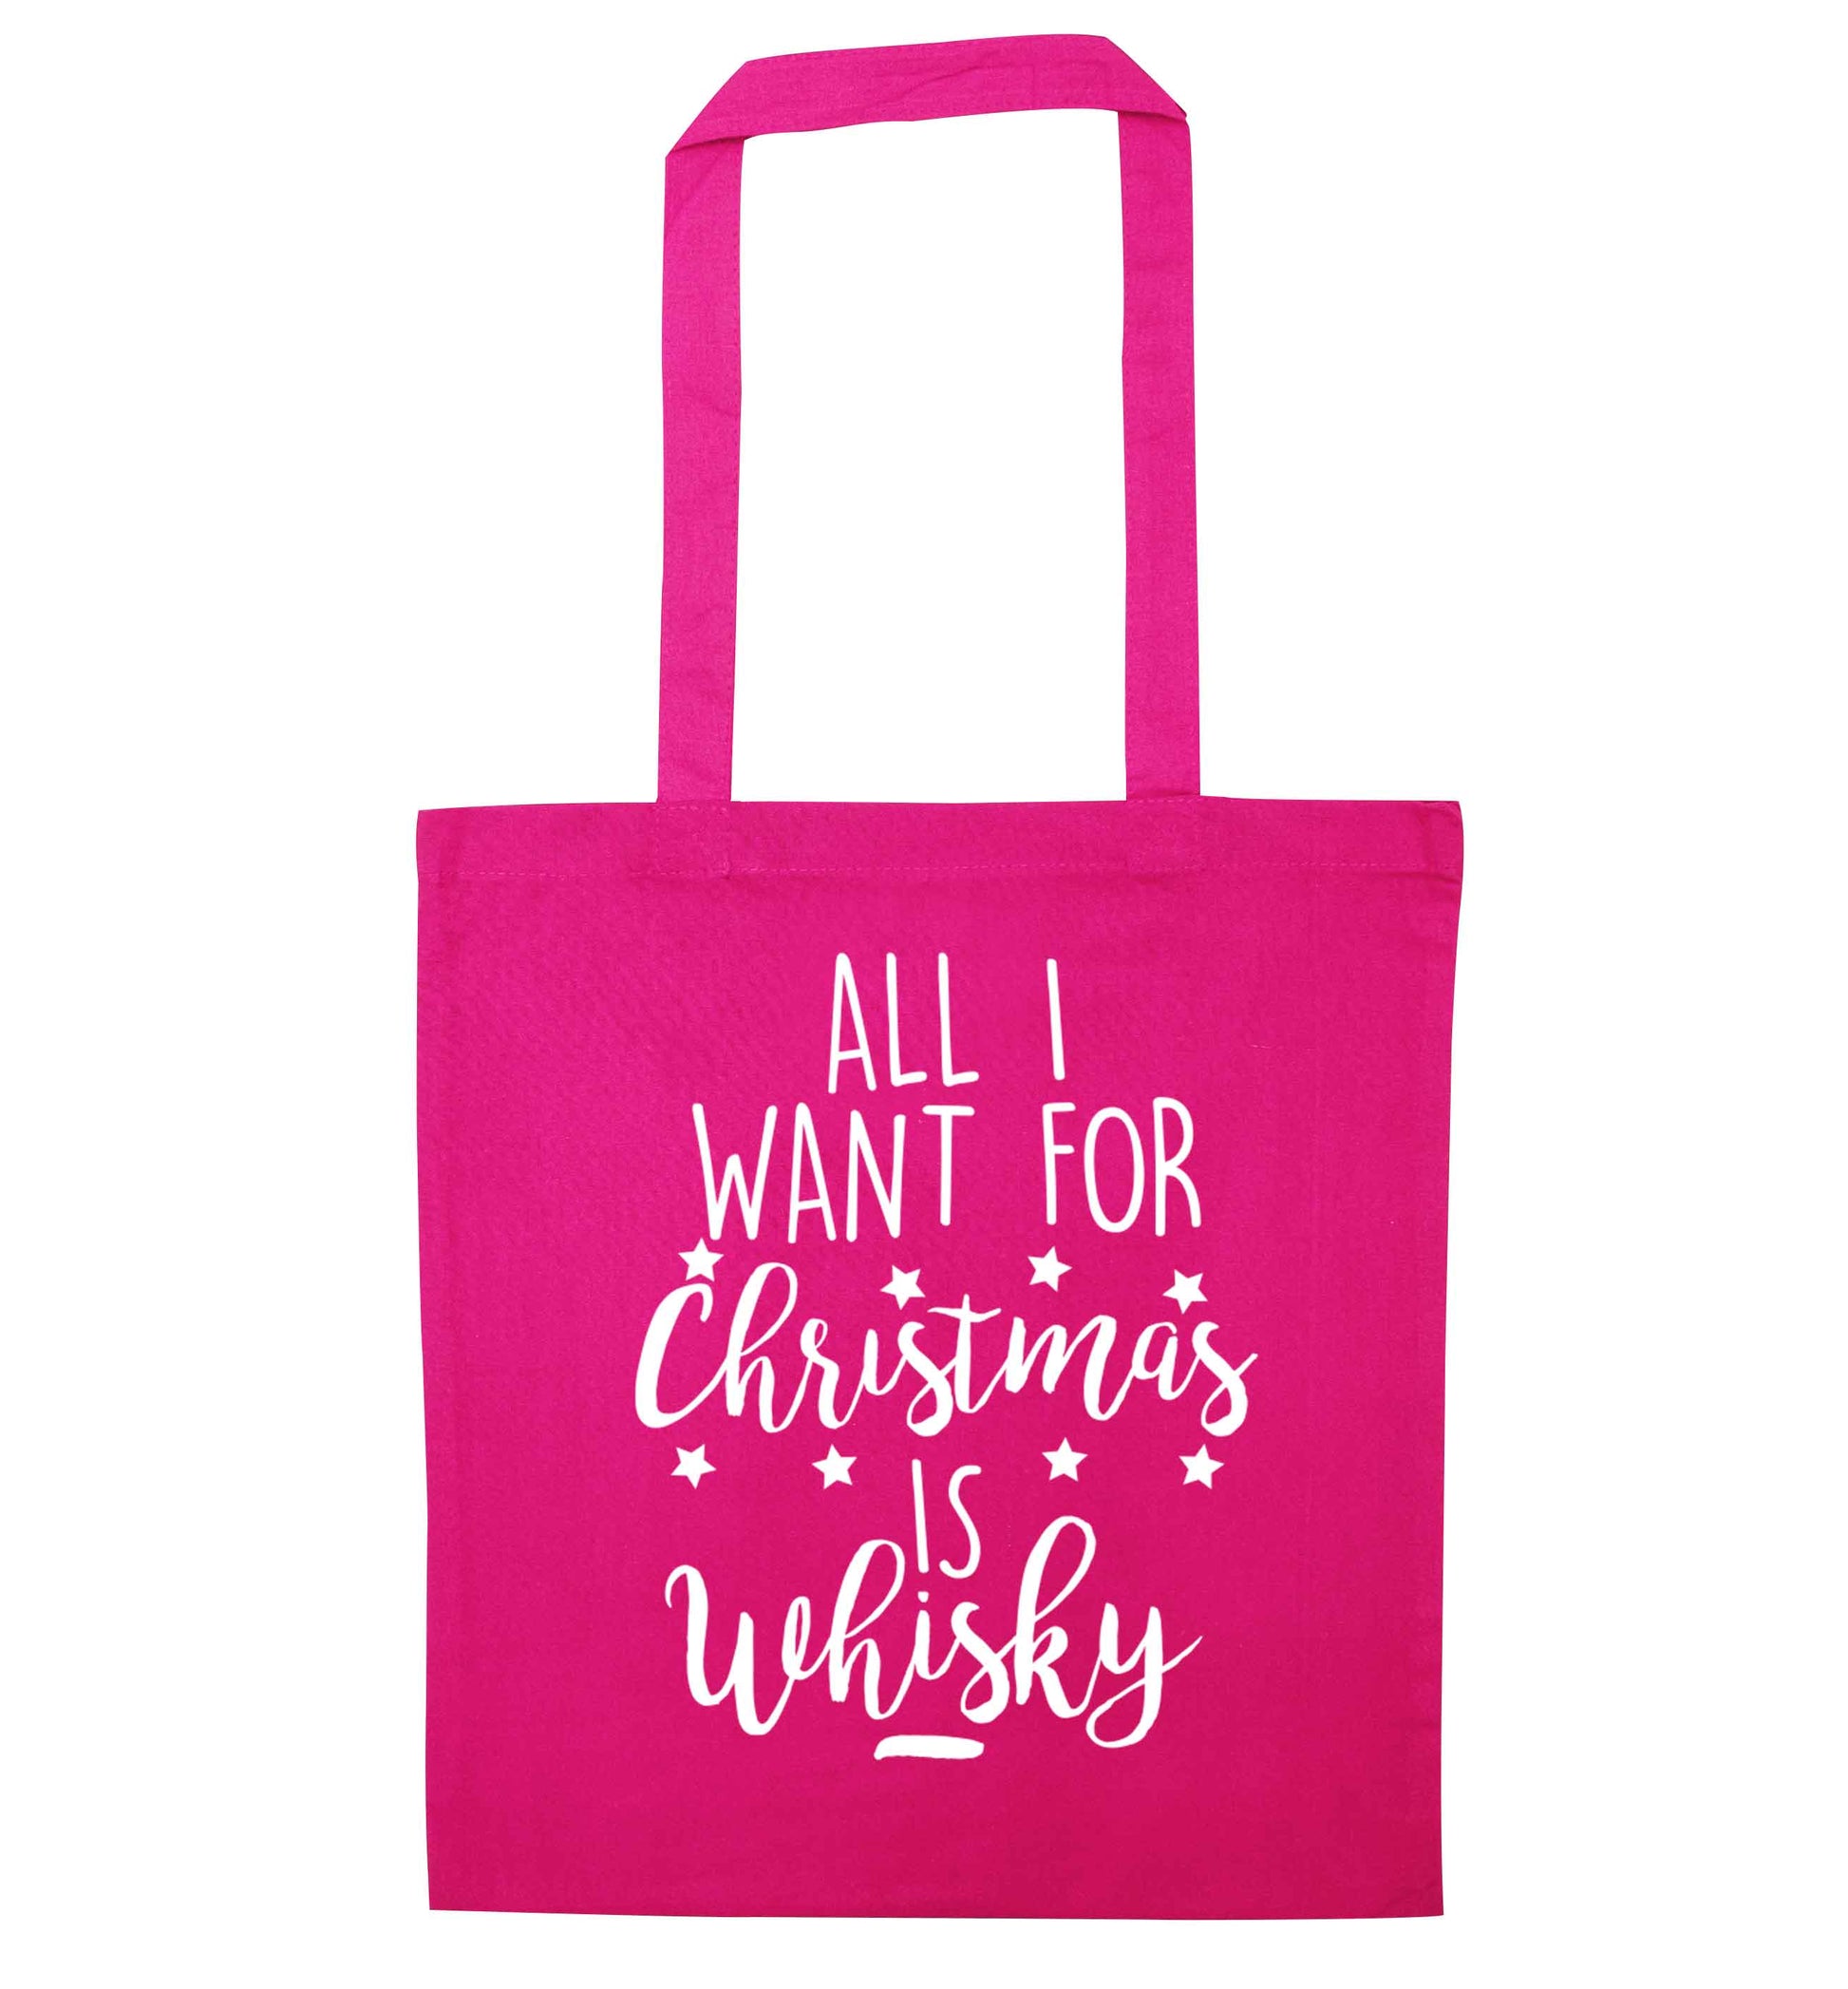 All I want for Christmas is whisky pink tote bag